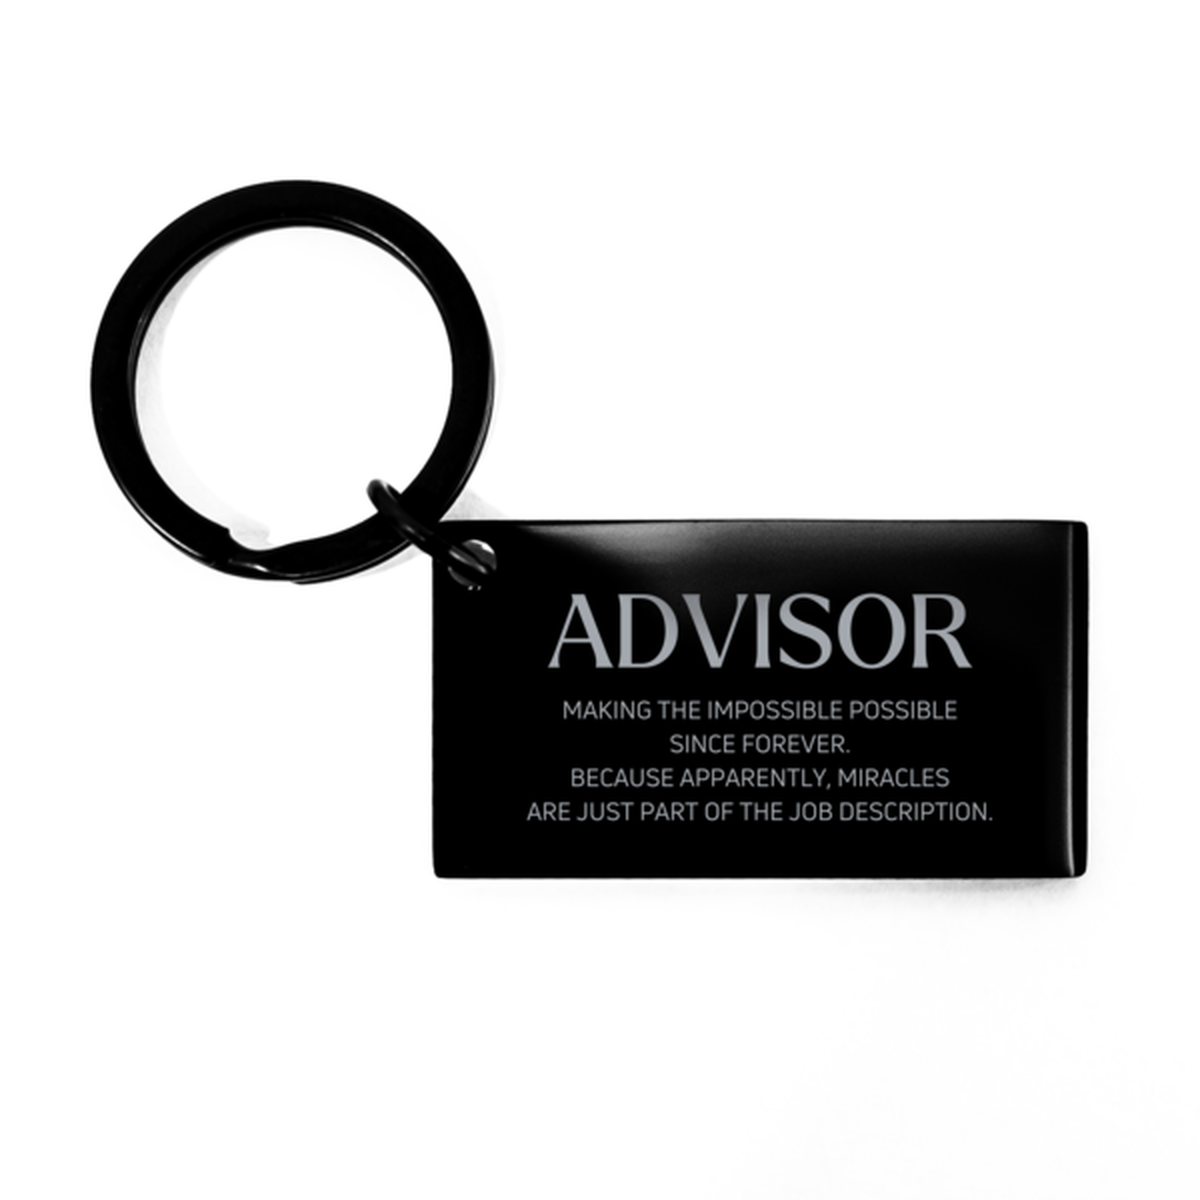 Funny Advisor Gifts, Miracles are just part of the job description, Inspirational Birthday Keychain For Advisor, Men, Women, Coworkers, Friends, Boss